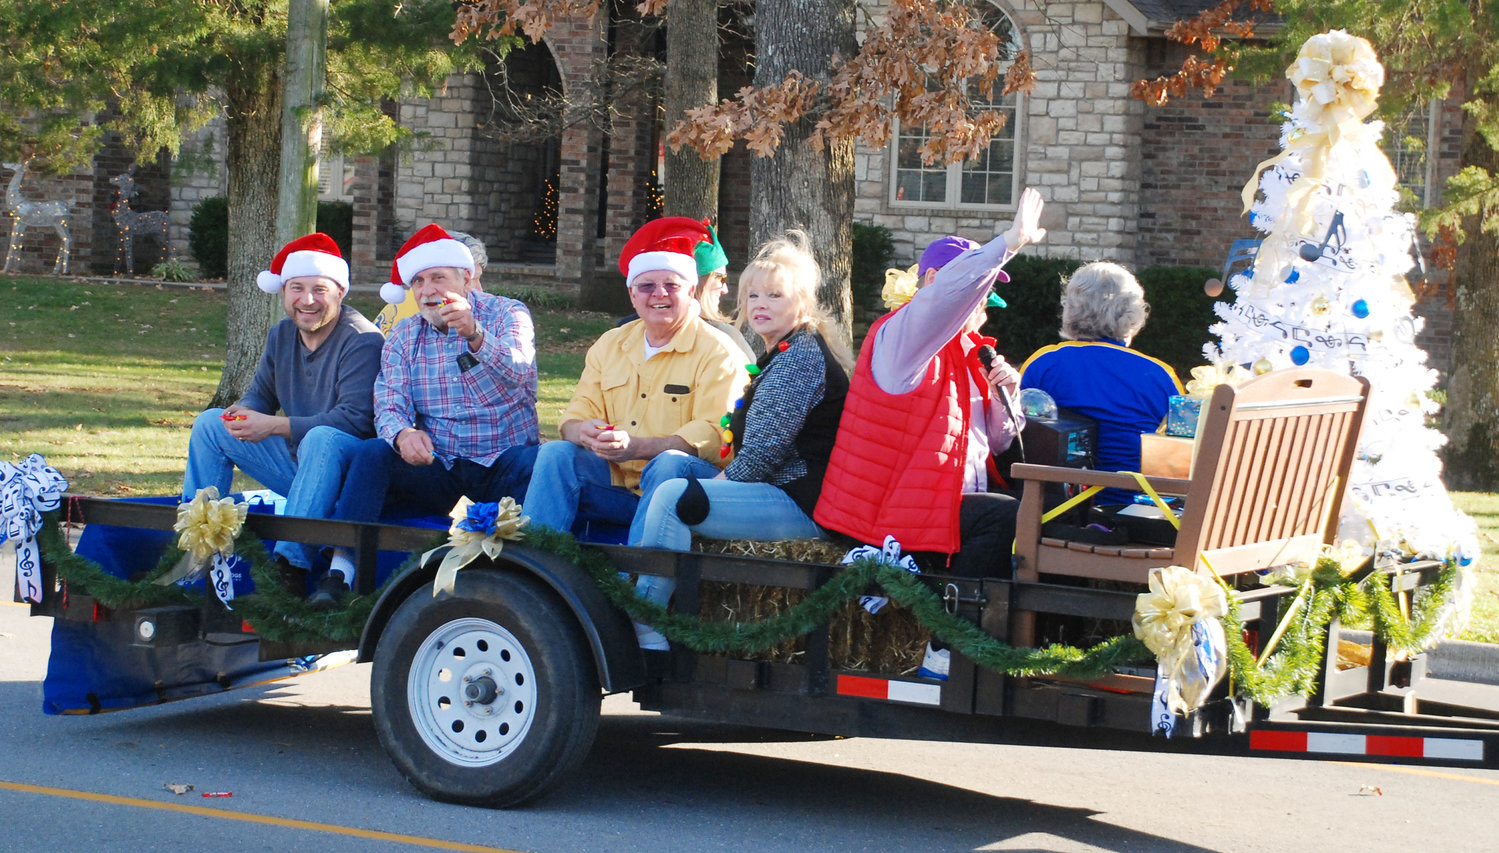 THE CHRISTIAN COUNTY LIONS CLUB waves to spectators.